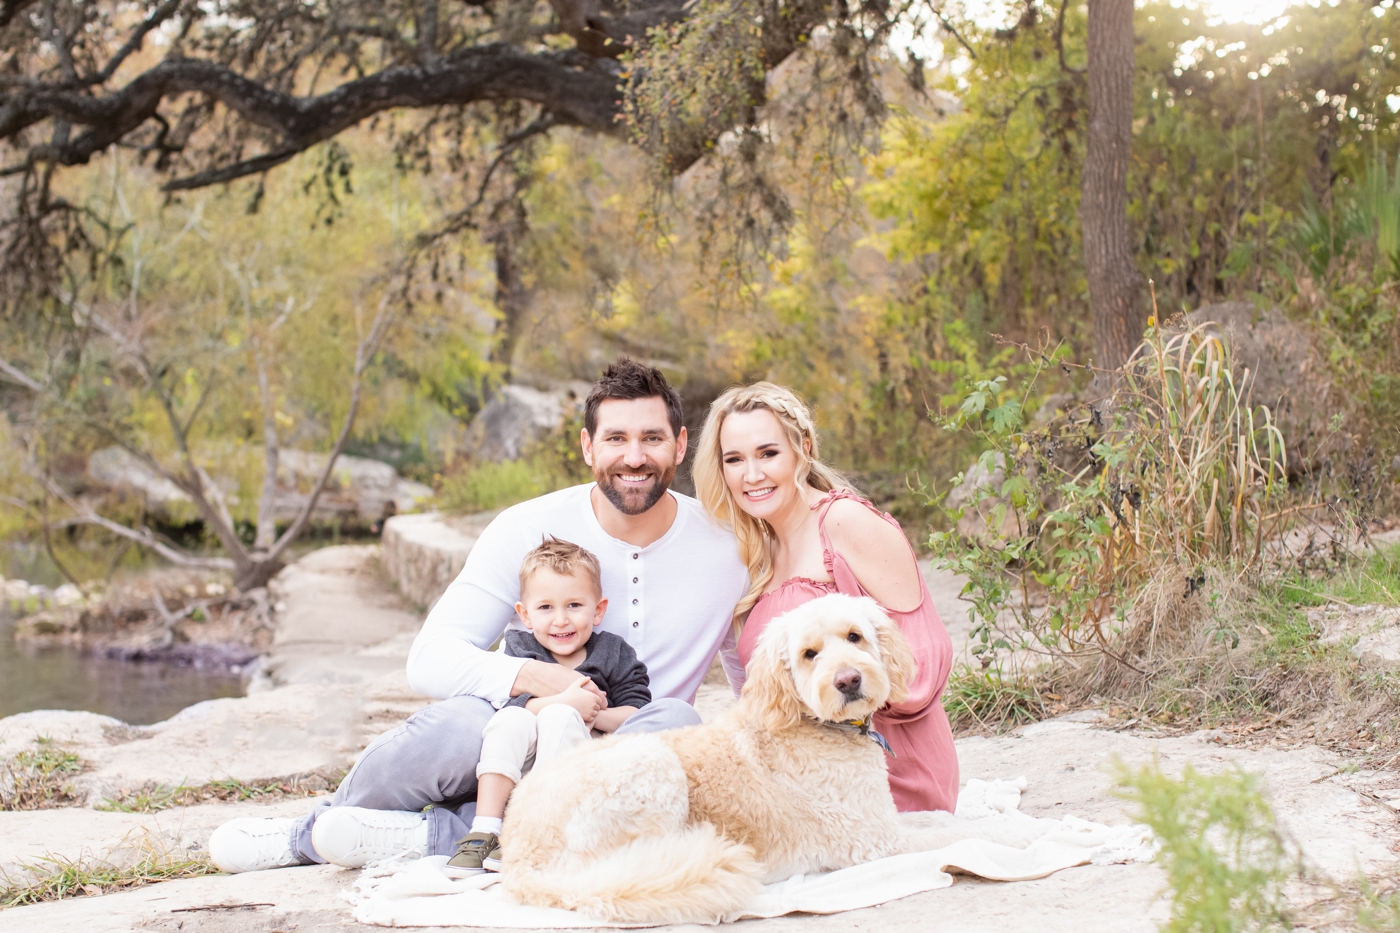 Family session in beautiful Austin TX park with dog. Photo by Sana Ahmed Photography.